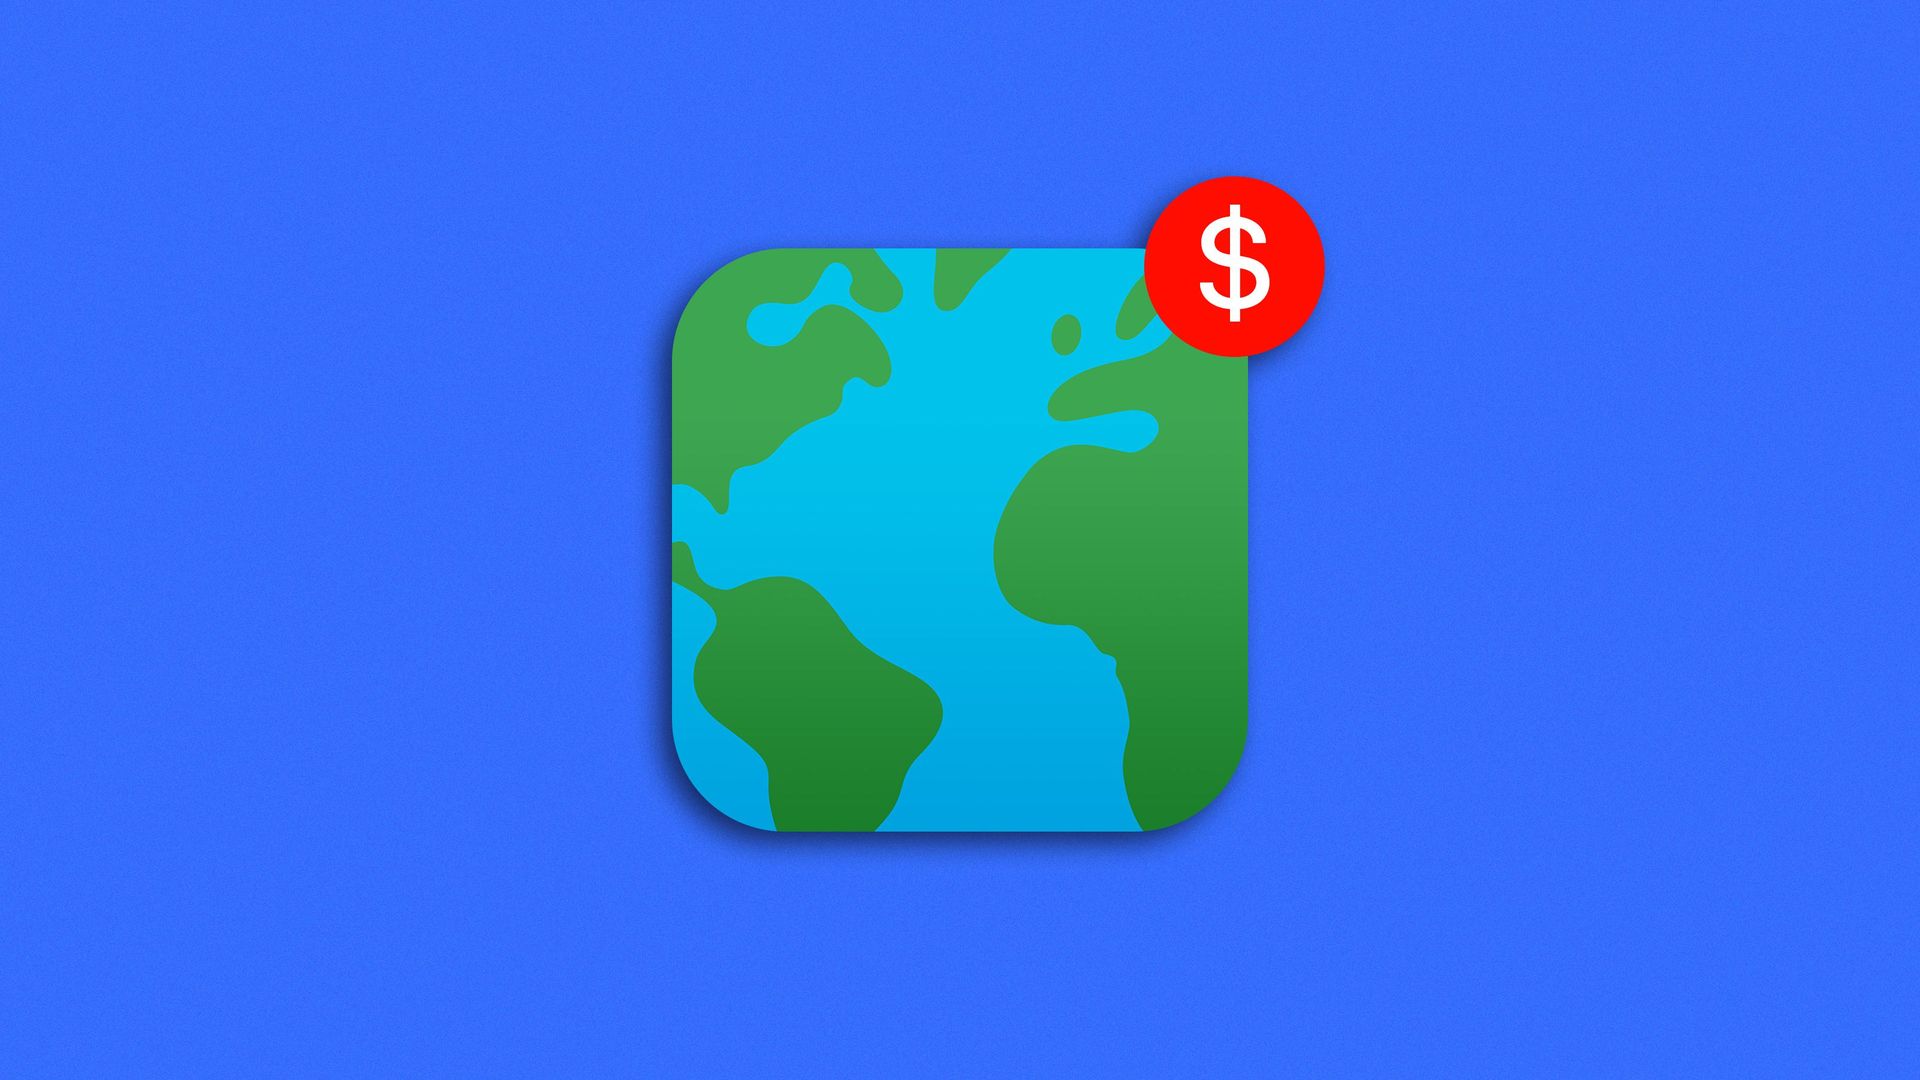 Illustration of an earth app icon with a notifications symbol that says "$"